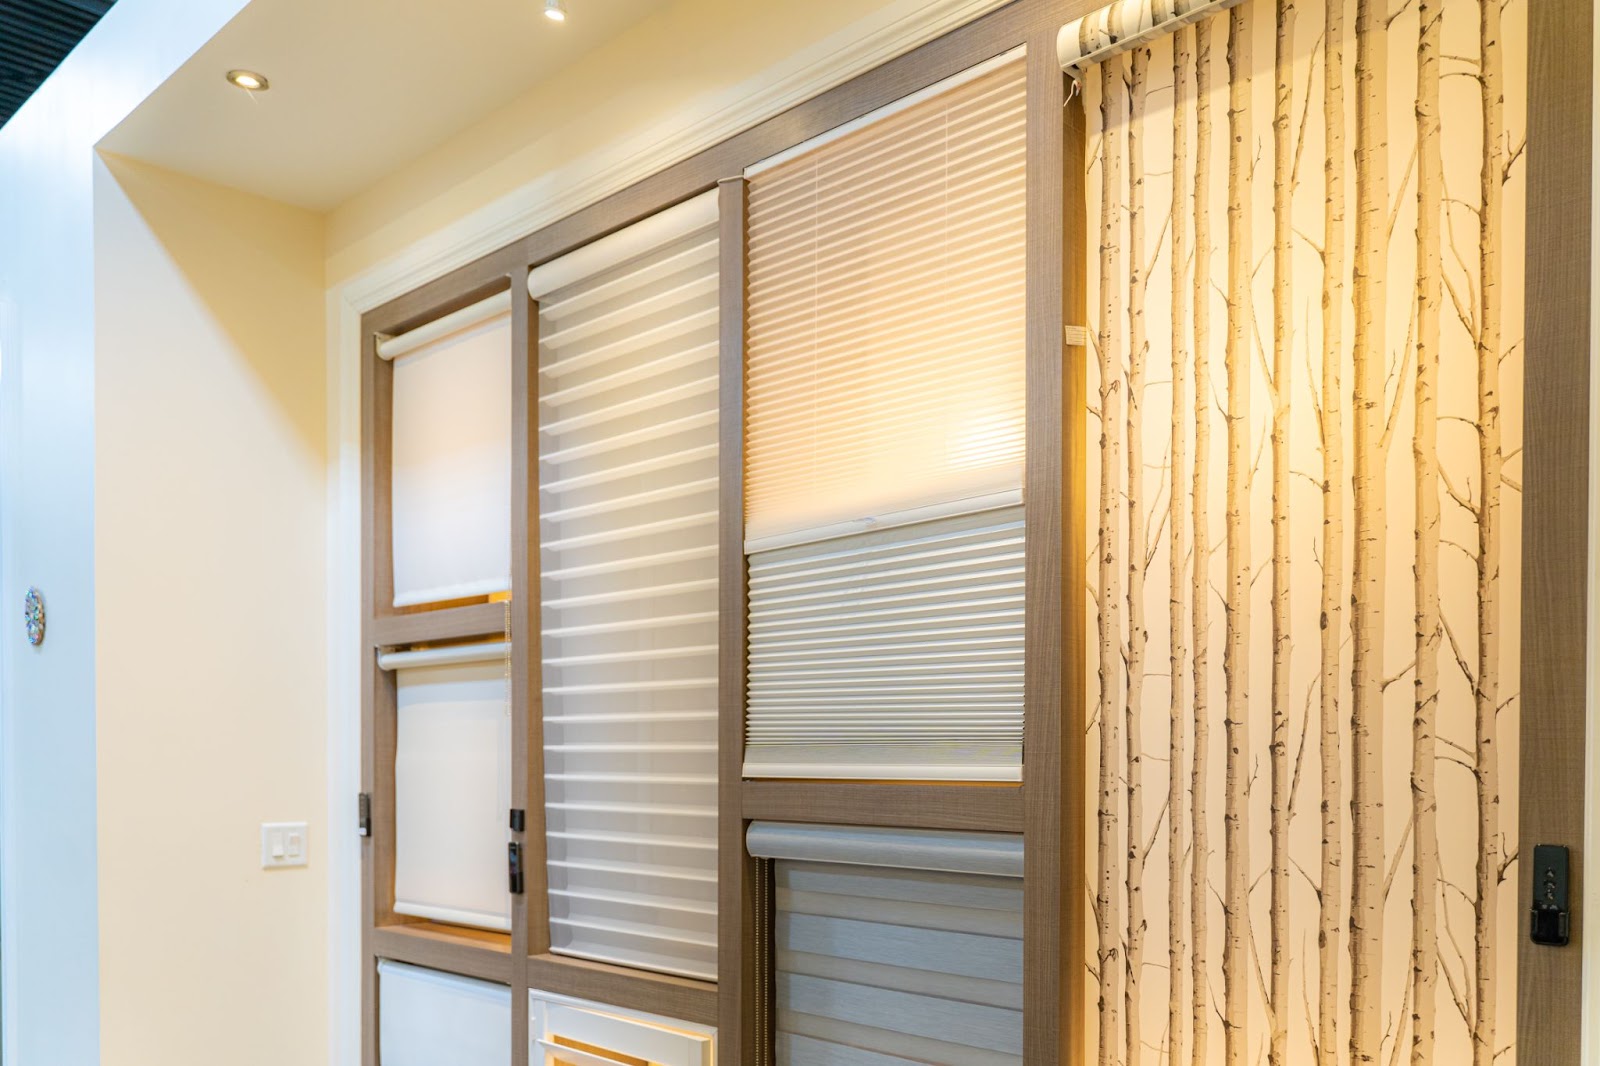 V+ Plus Homes, Unit 37/38 has a variety of window coverings including motorized blinds and drapes. 